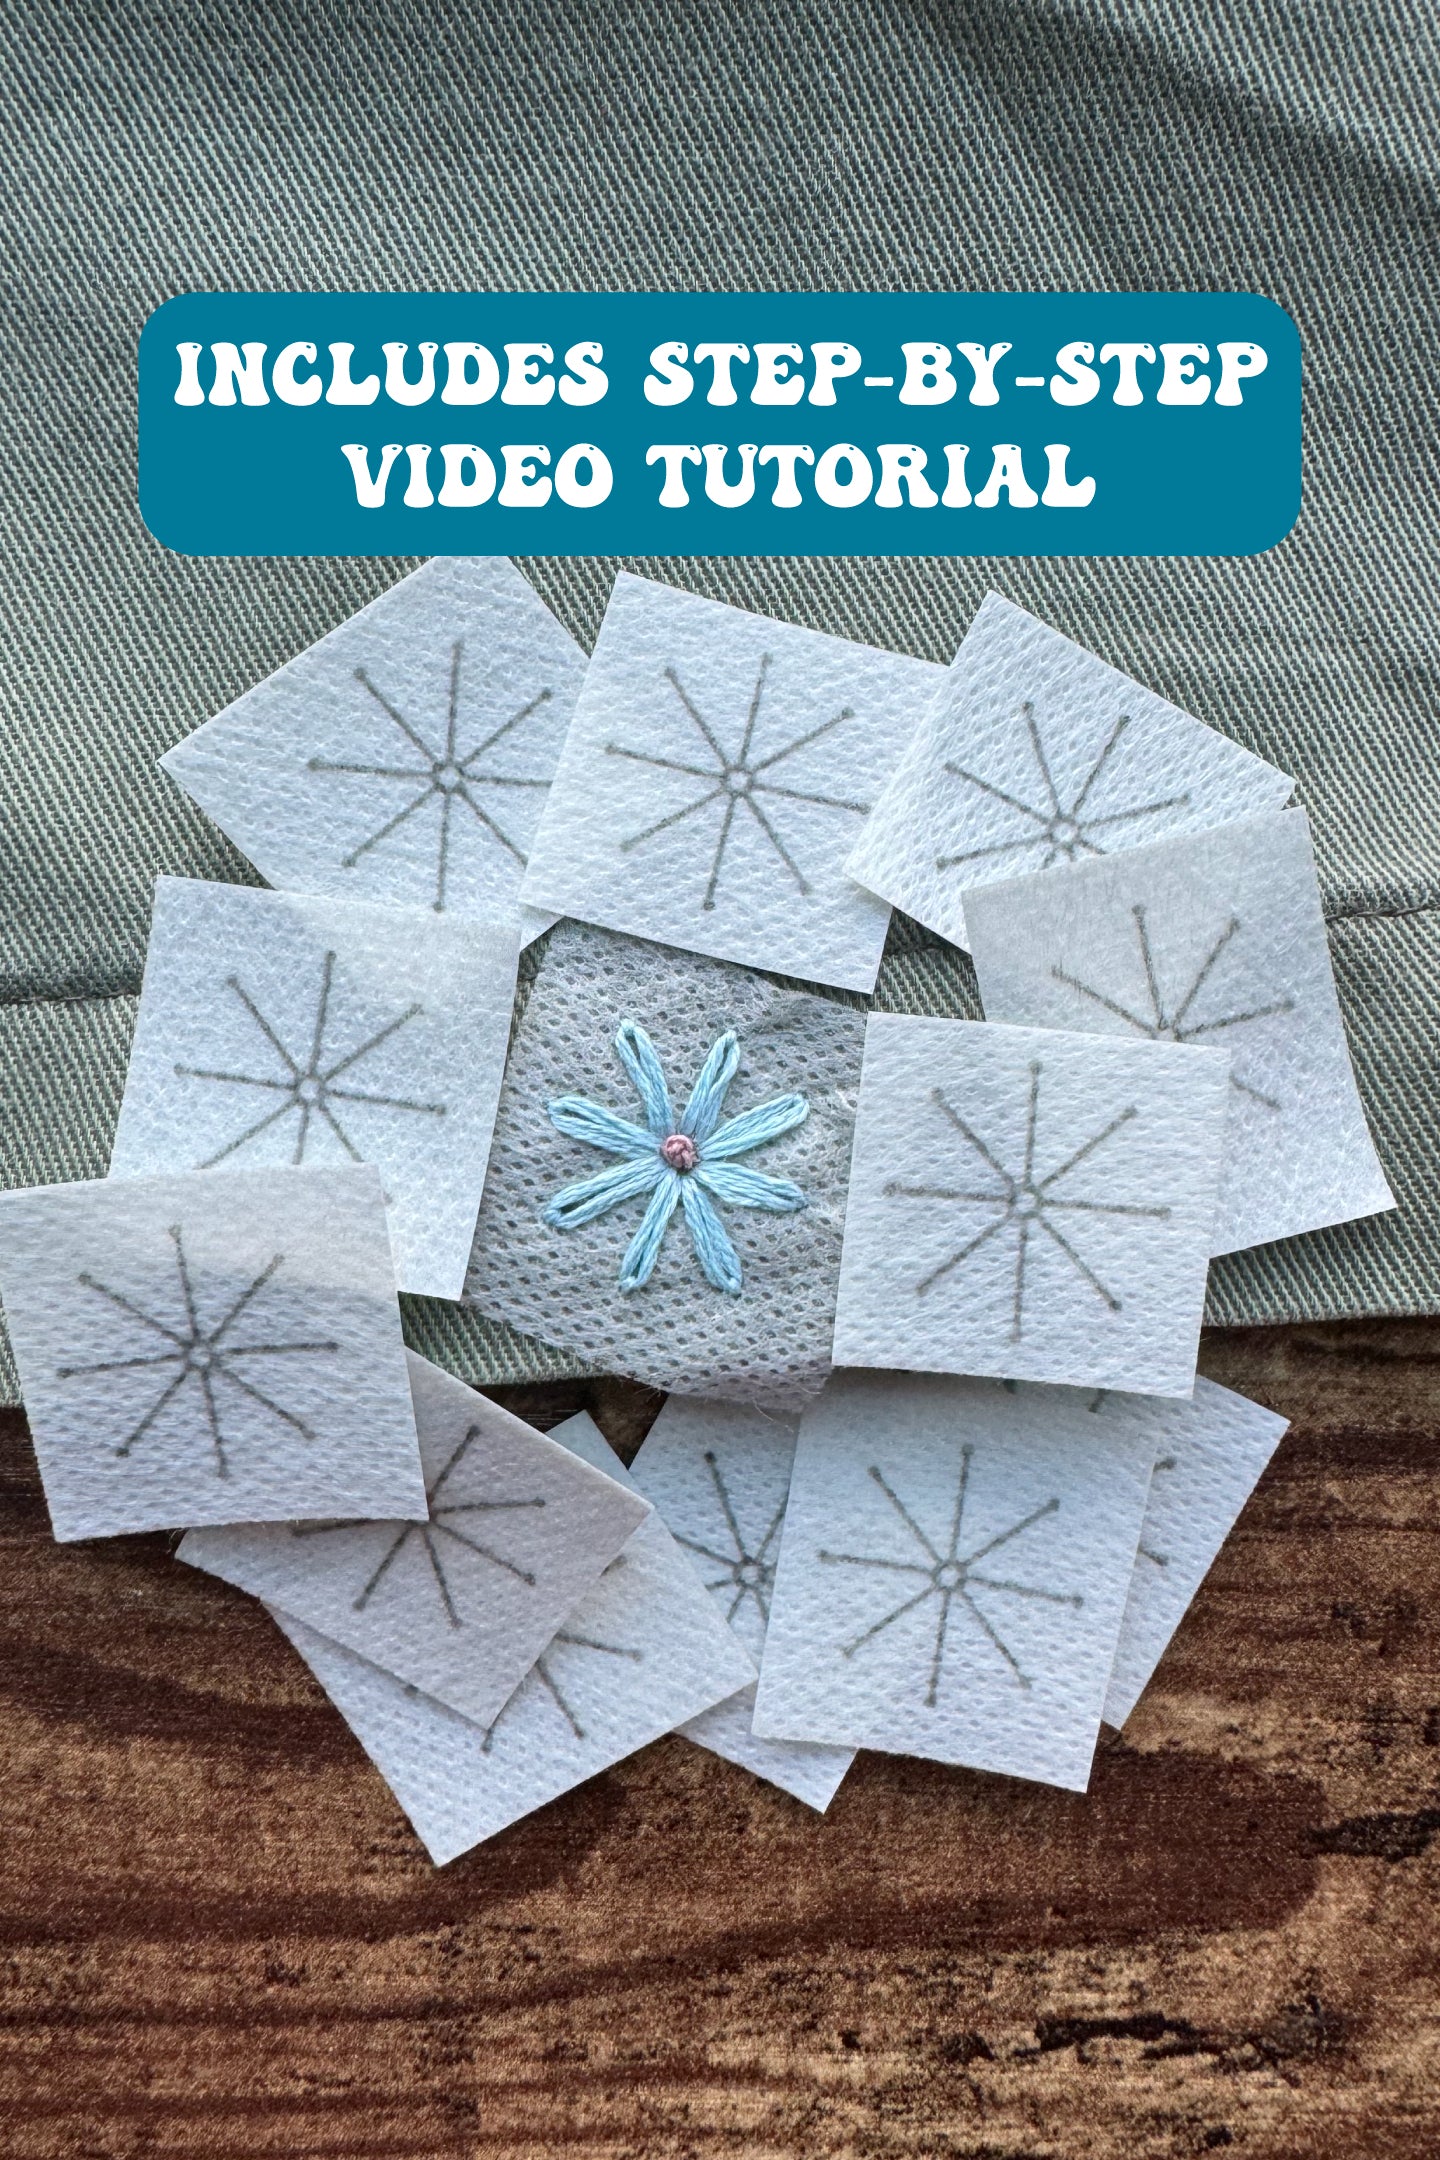 The Laziest Daisy Stick & Stitch Embroidery Stabilizer - 12 Pack - Includes Video Tutorial